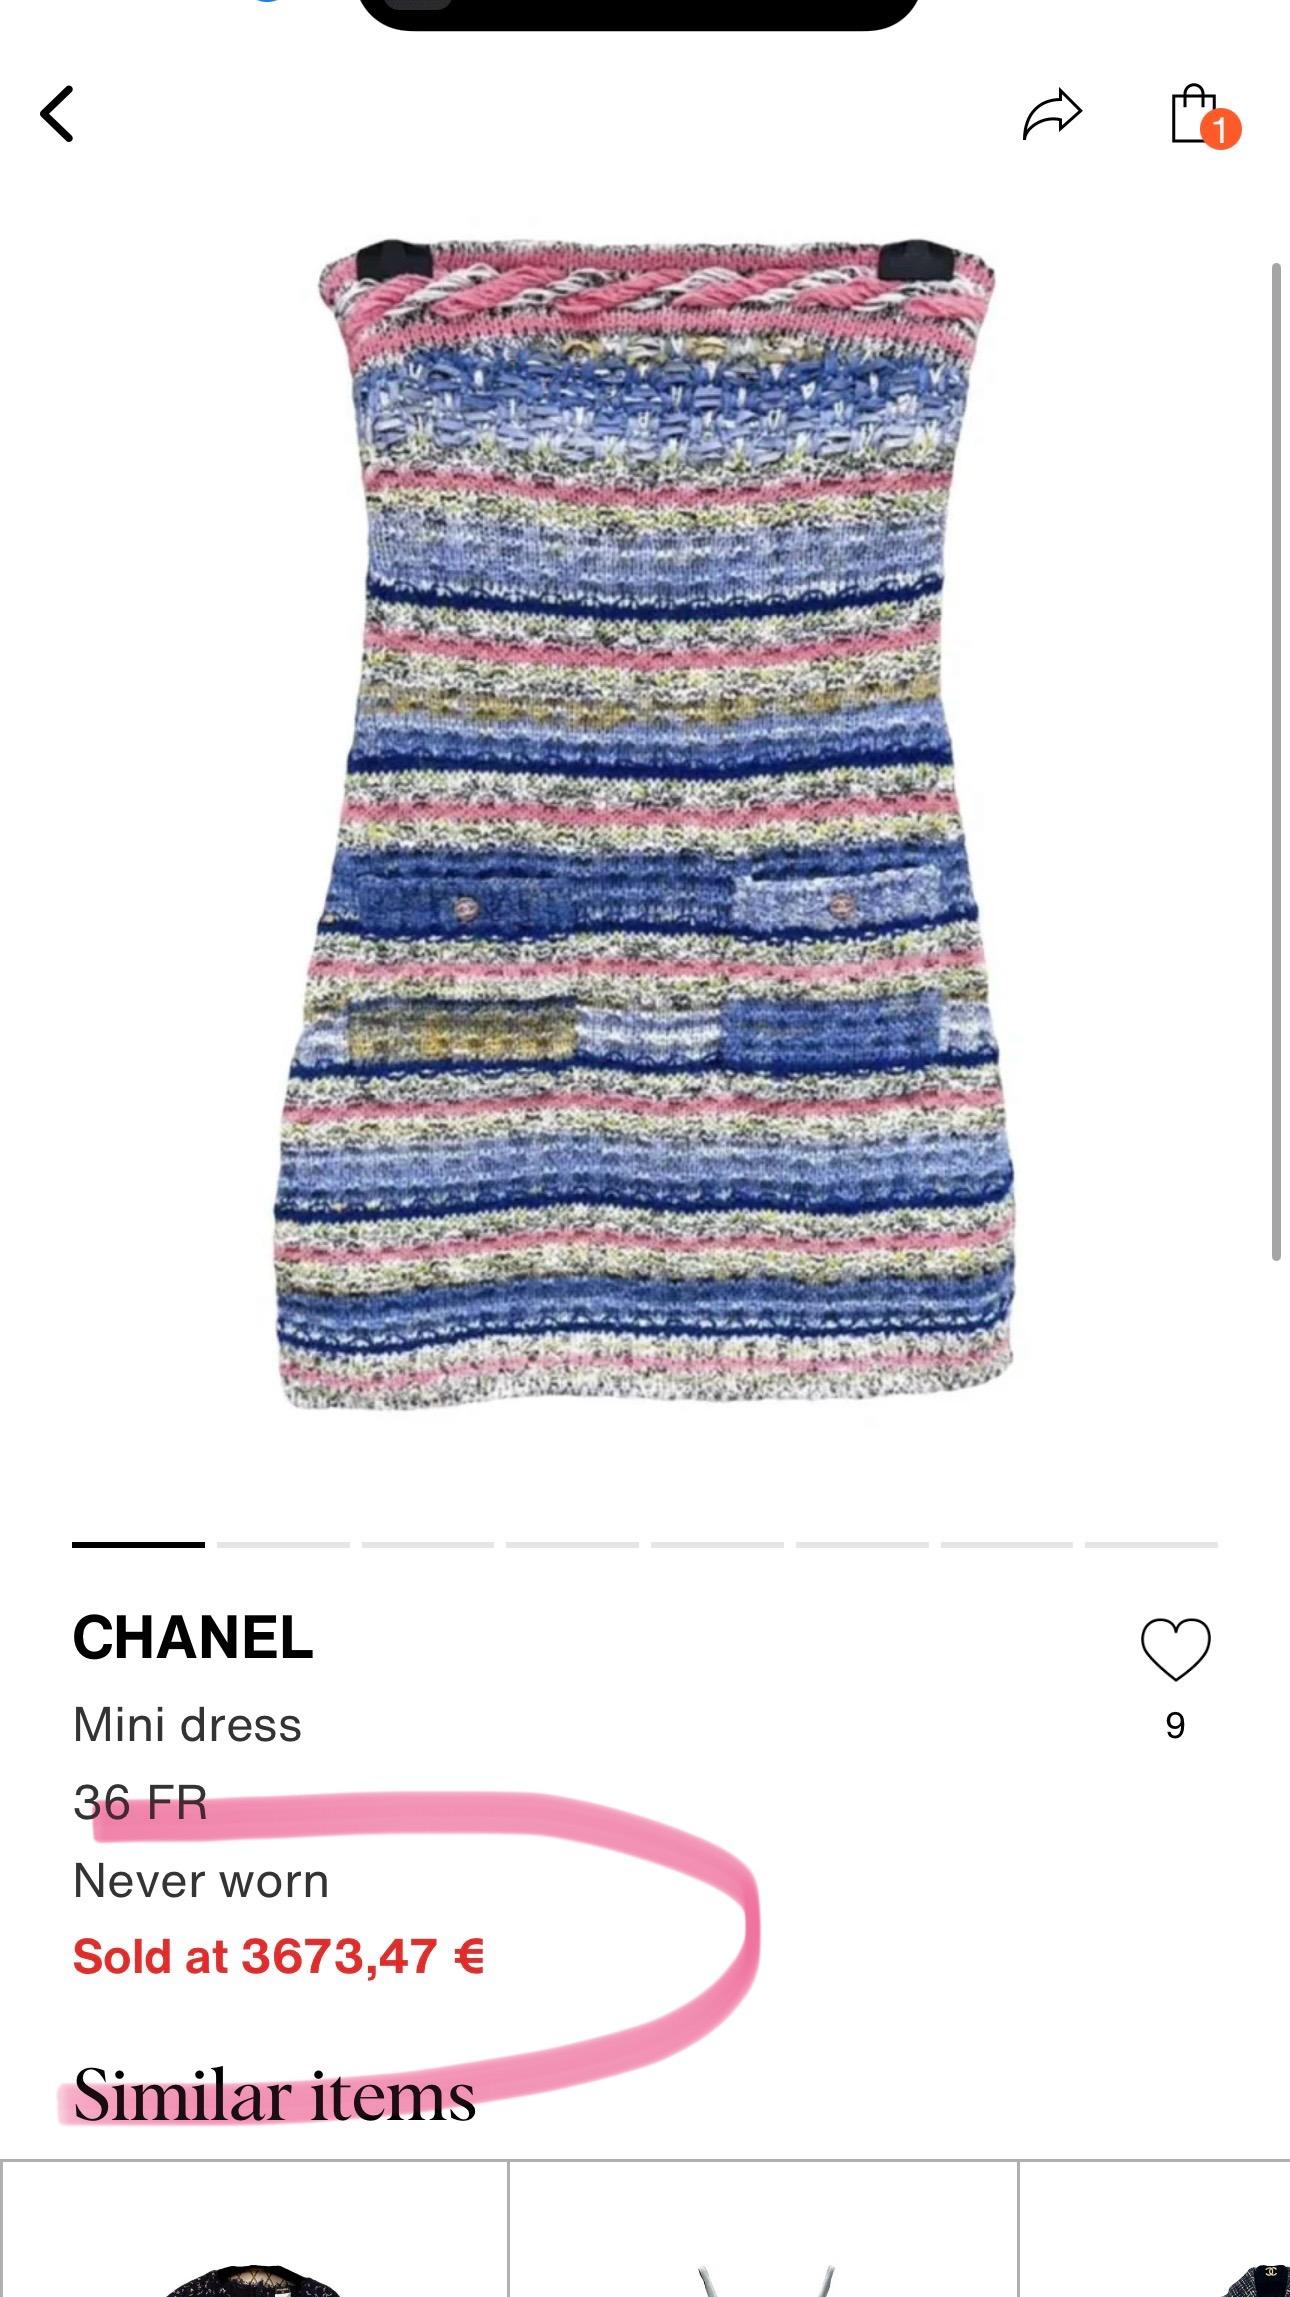 Stunning Chanel multicolour tweed dress from 2021 / 2022 Spring Collection,
- CC logo buttons
Size mark 38 FR. never worn.